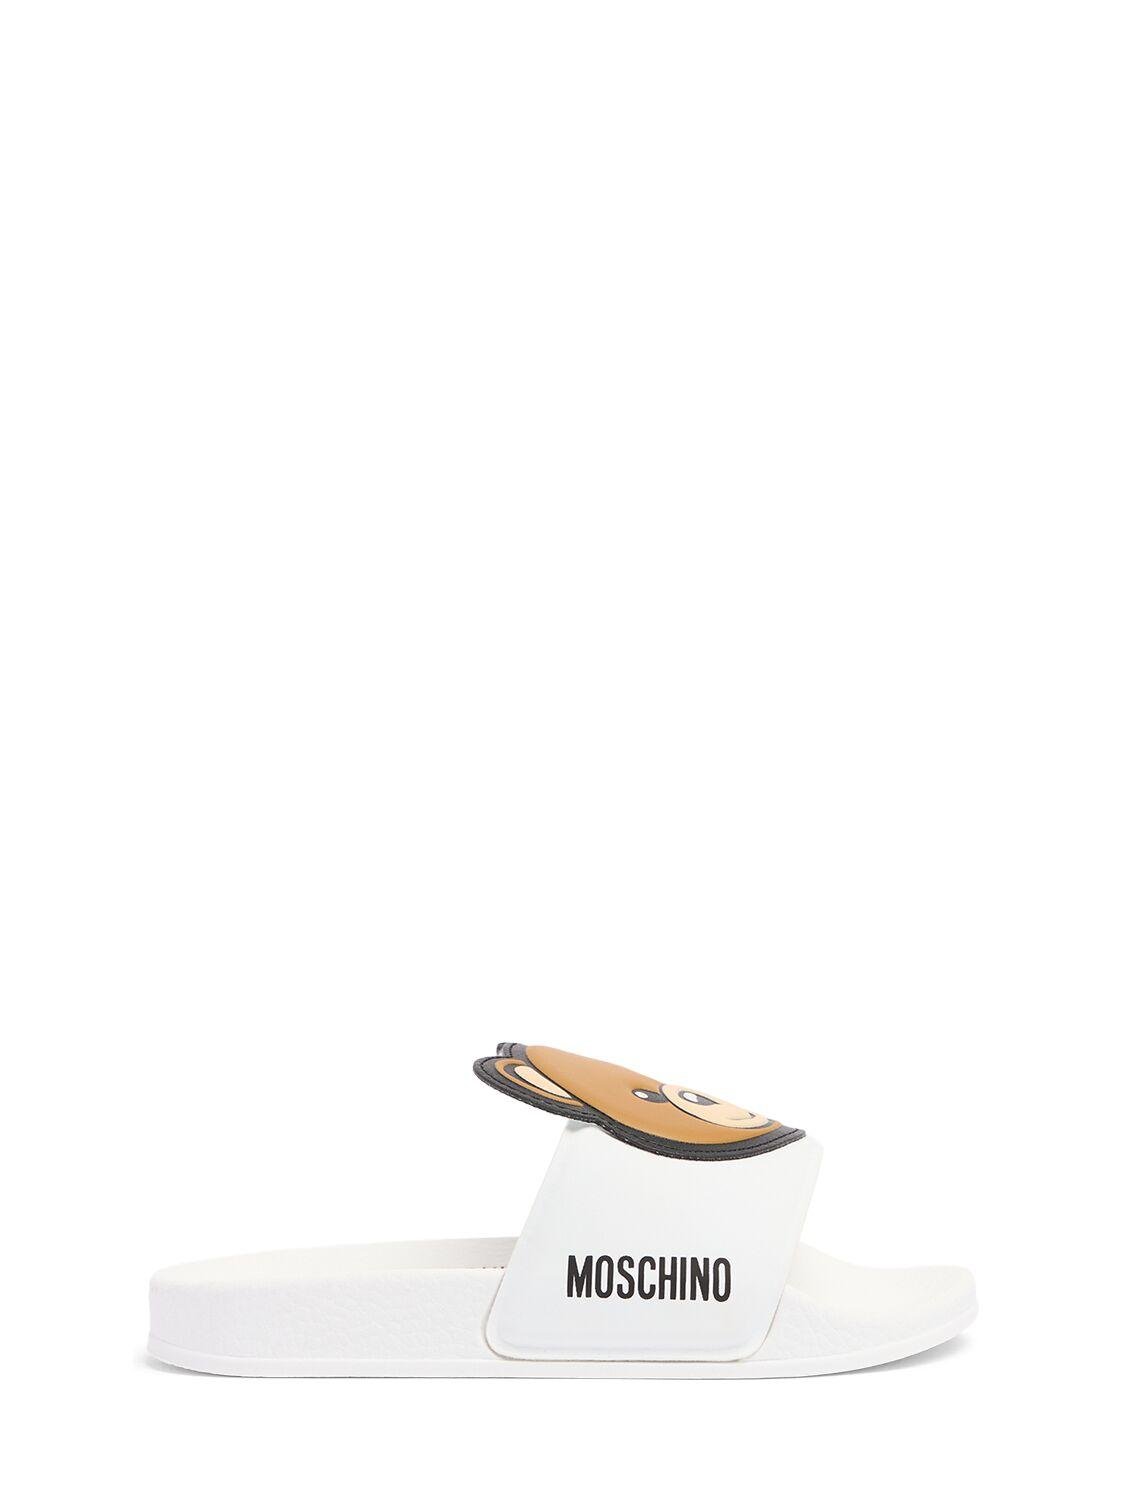 Logo Print Rubber Slide Sandals W/ Patch by MOSCHINO